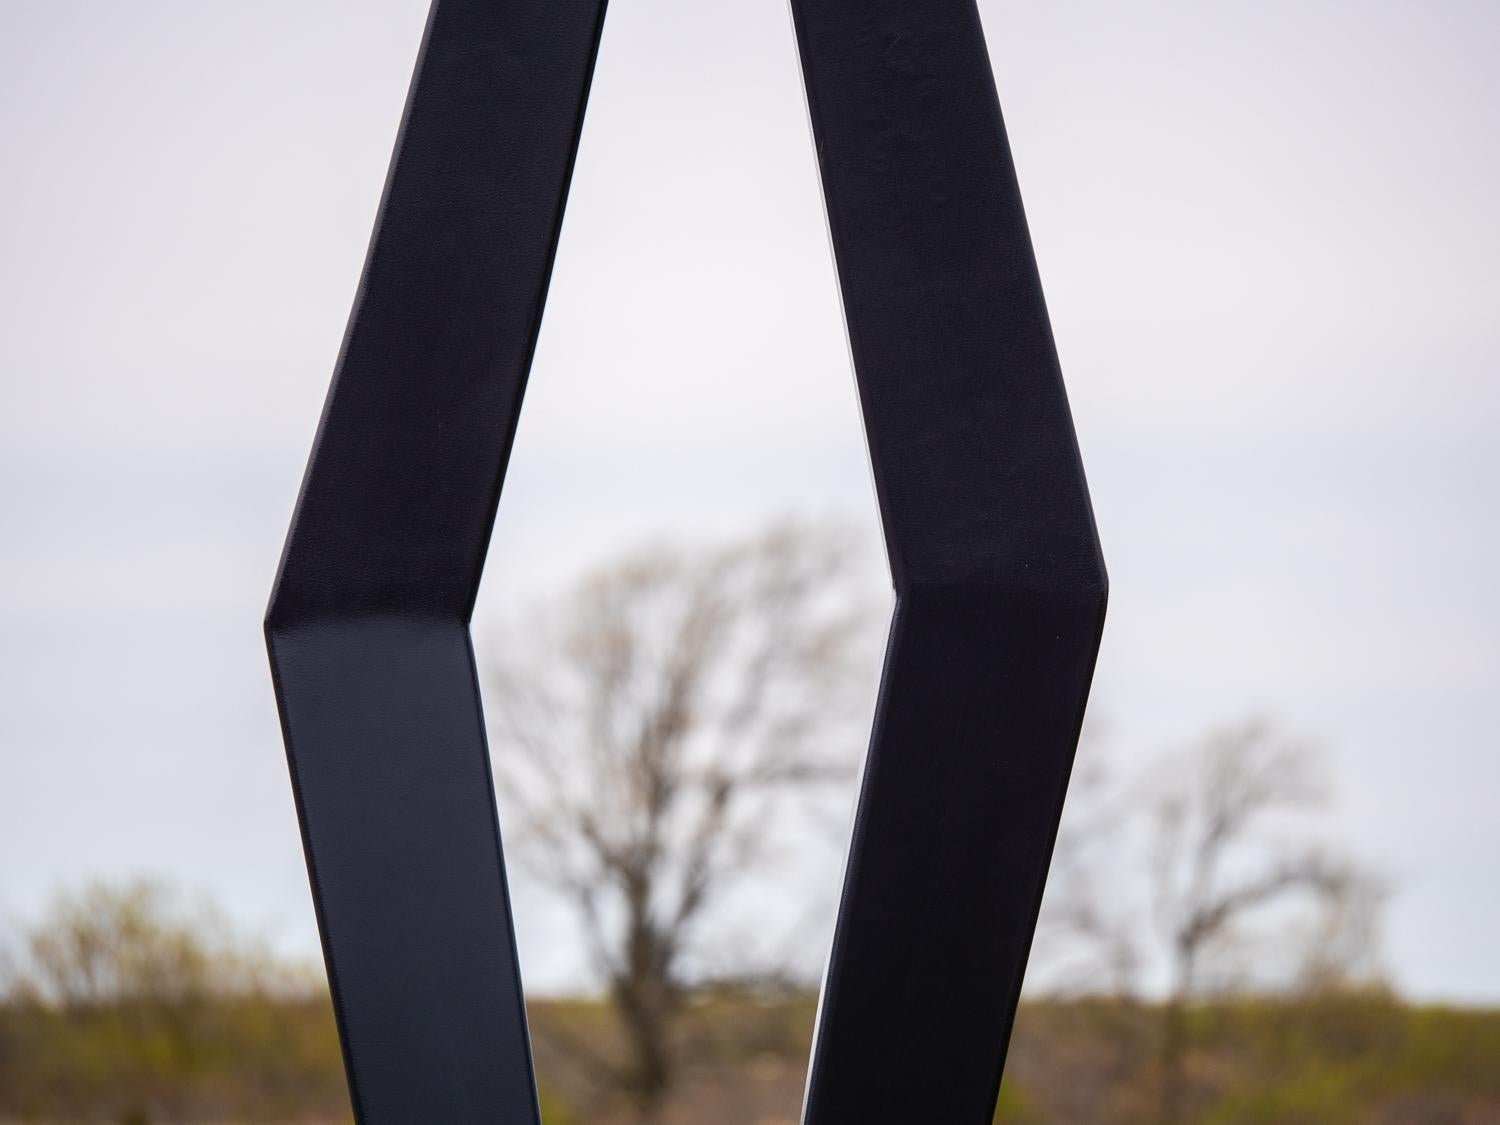 Past Conversations - colourful, playful, abstracted figures, steel sculpture - Gray Abstract Sculpture by R. Clark Ellis